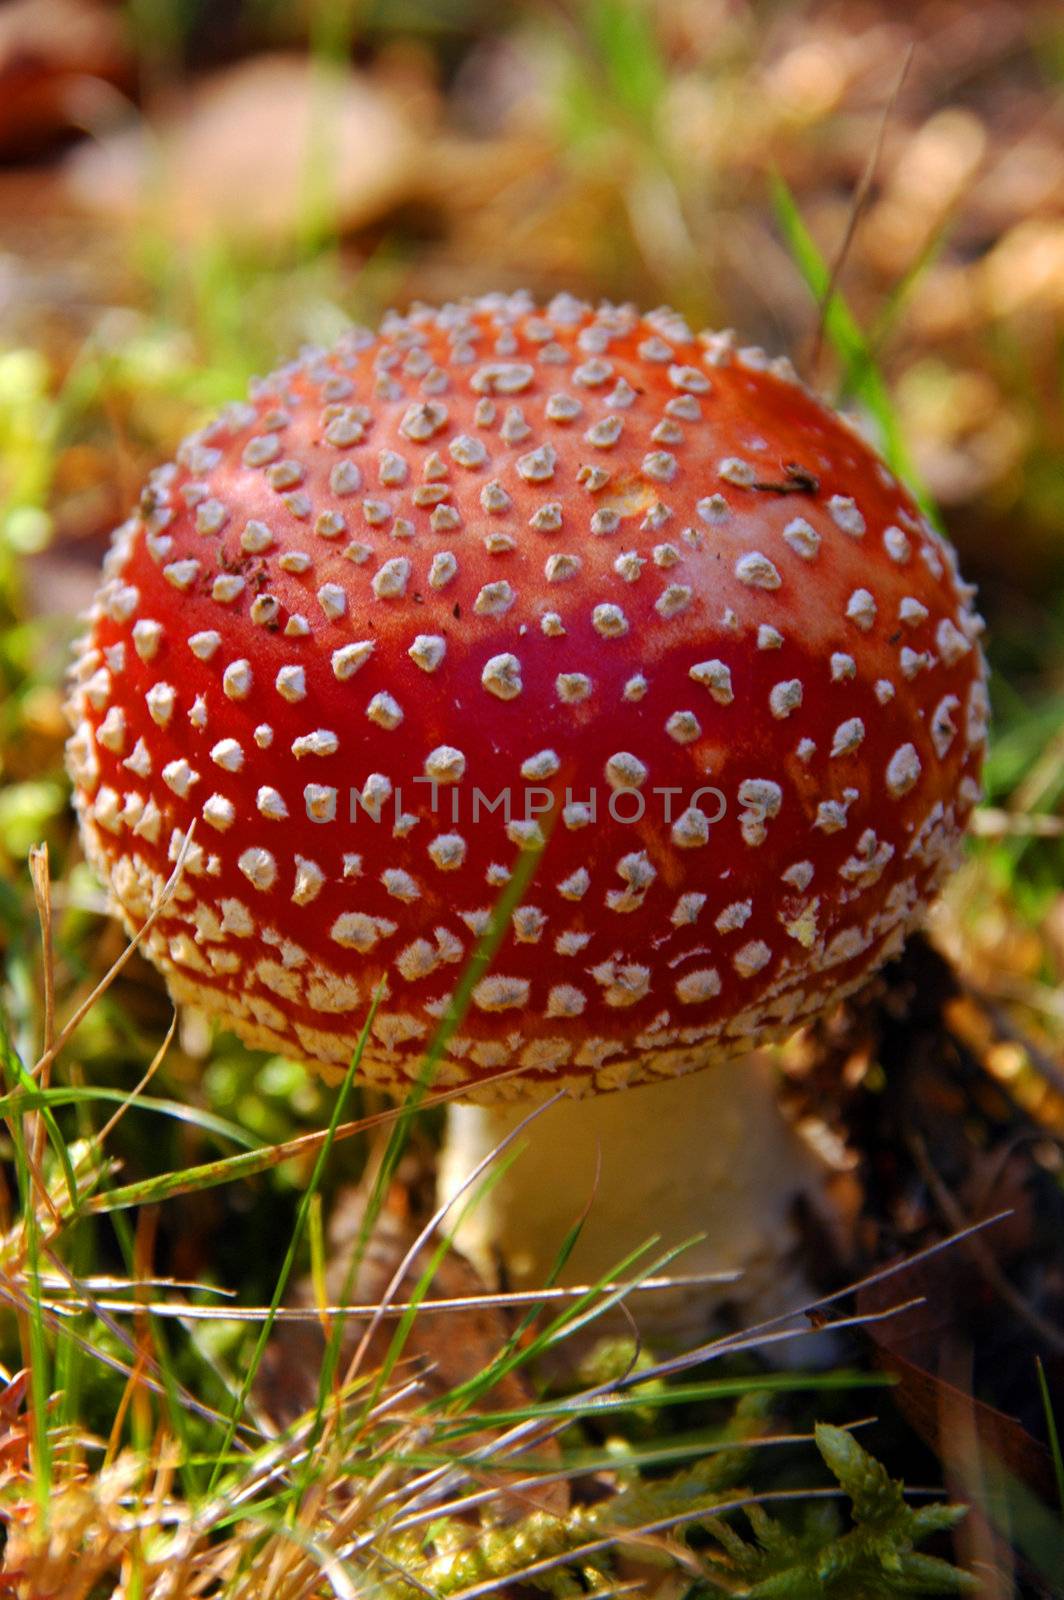 An amanita muscaria toadstool by raalves